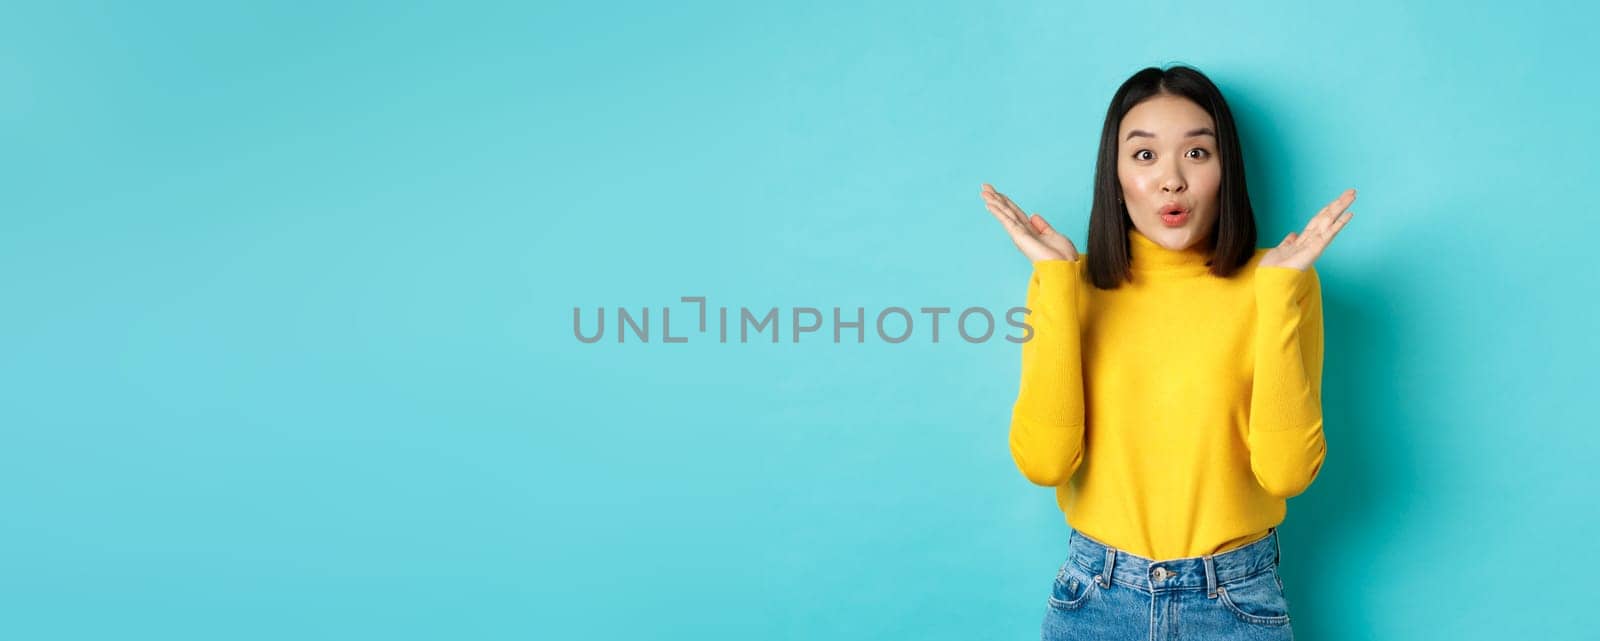 Beauty and fashion concept. Image of excited and surprised japanese girl saying wow with amazement, raising hands up near face, standing against blue background.